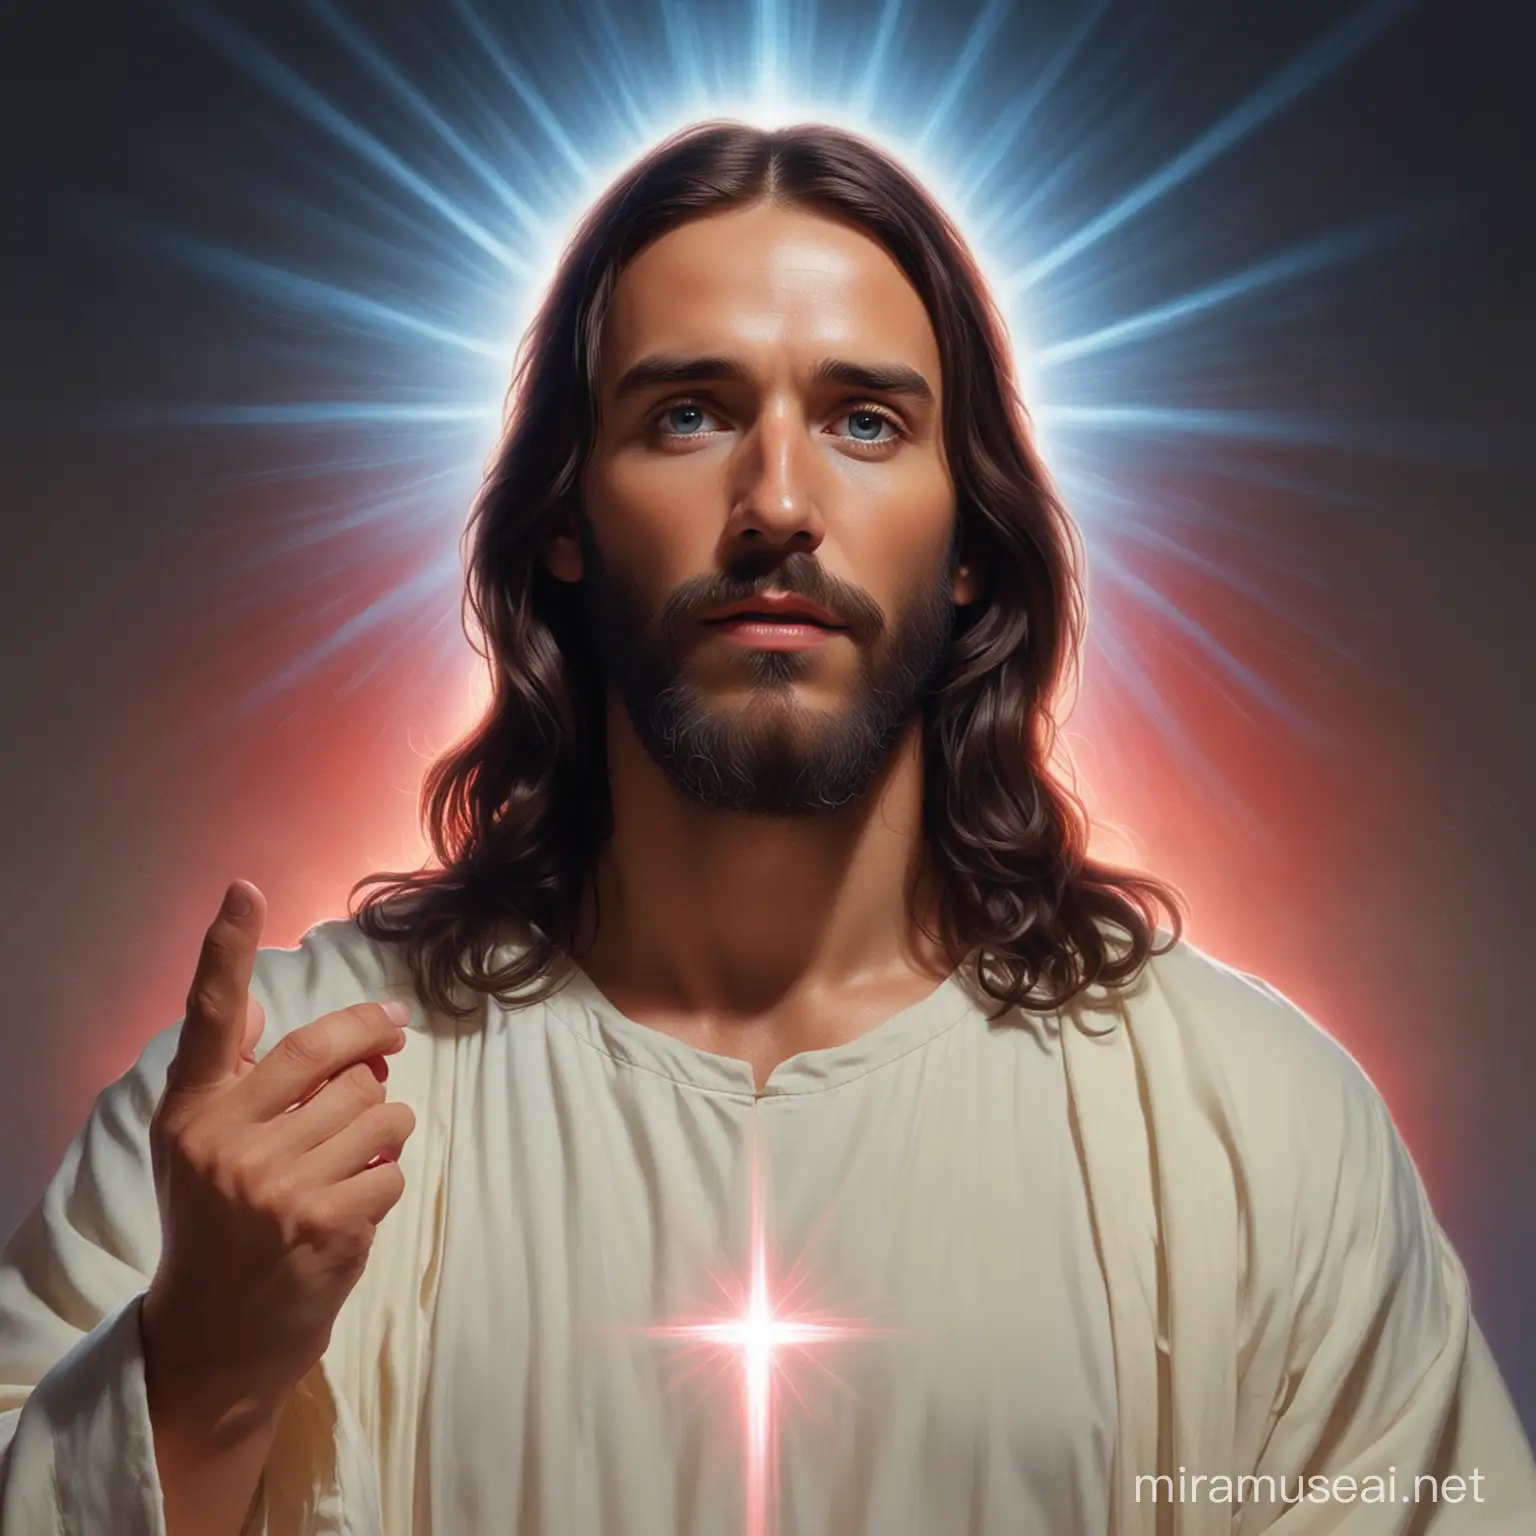 Jesus, with one ray of red light and one ray of blue light emmanating from his heart